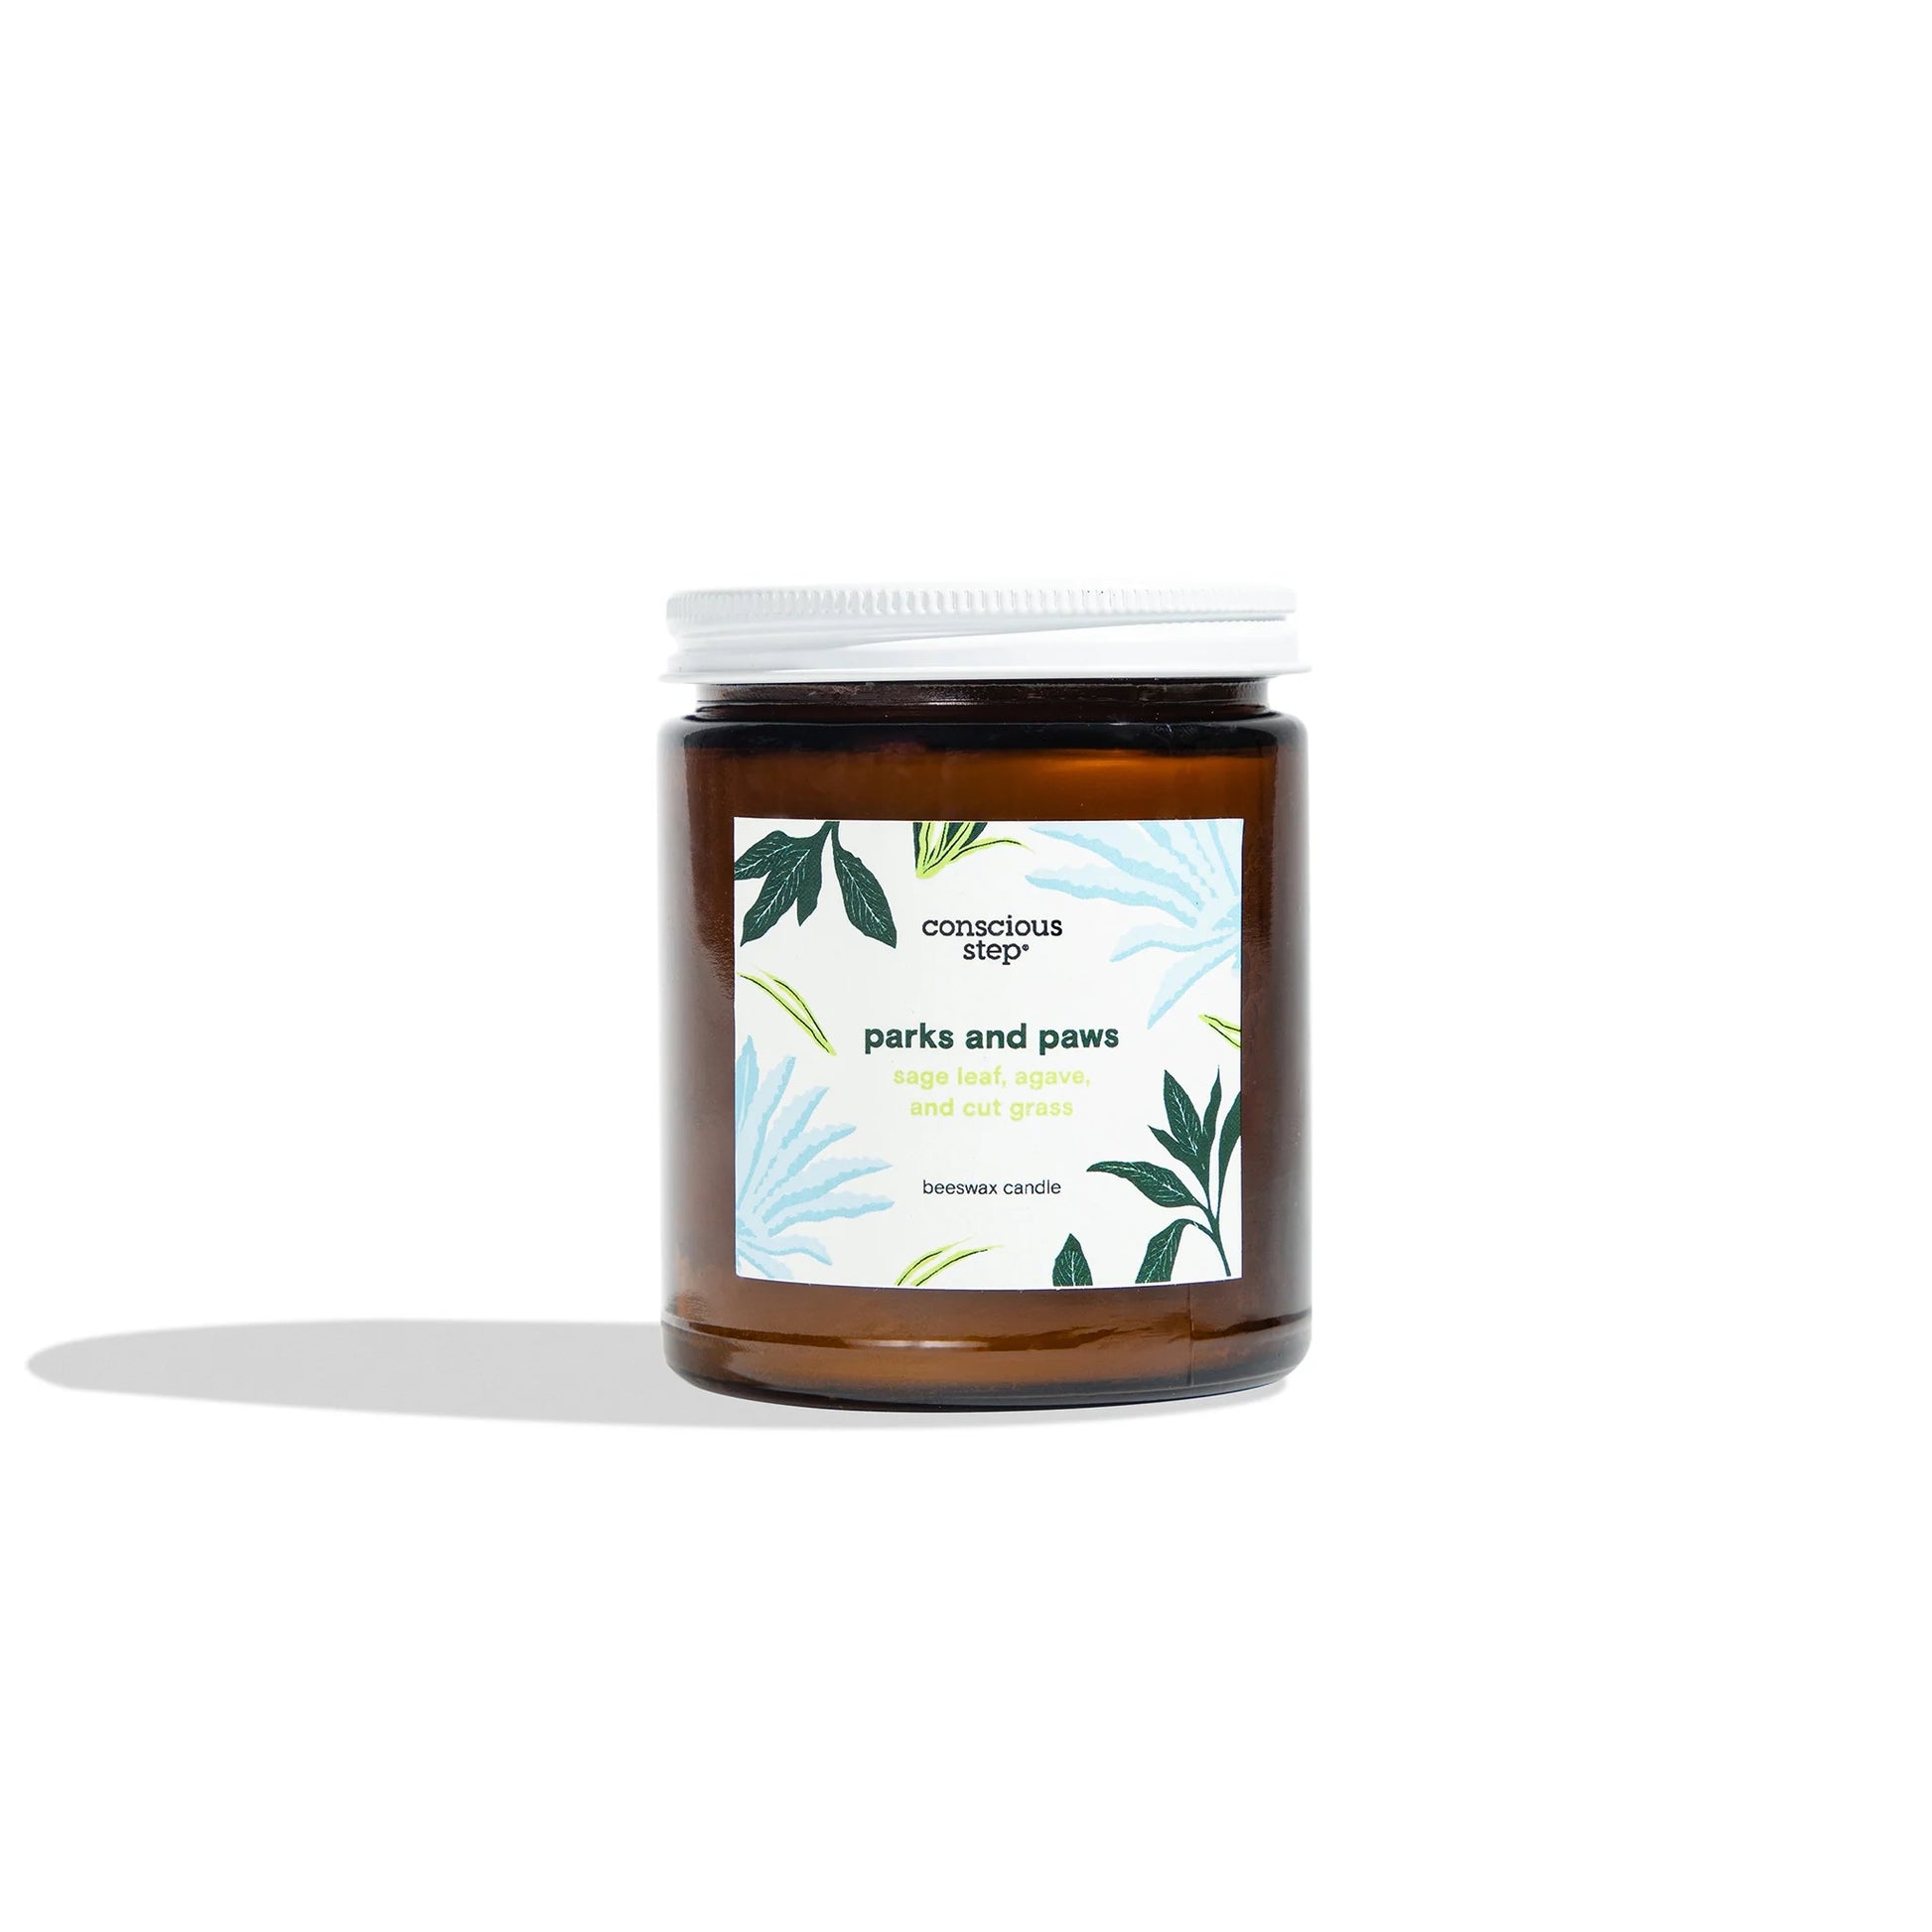 Conscious Step, Candles That Save Dogs - Parks and Paws - Boutique Dandelion